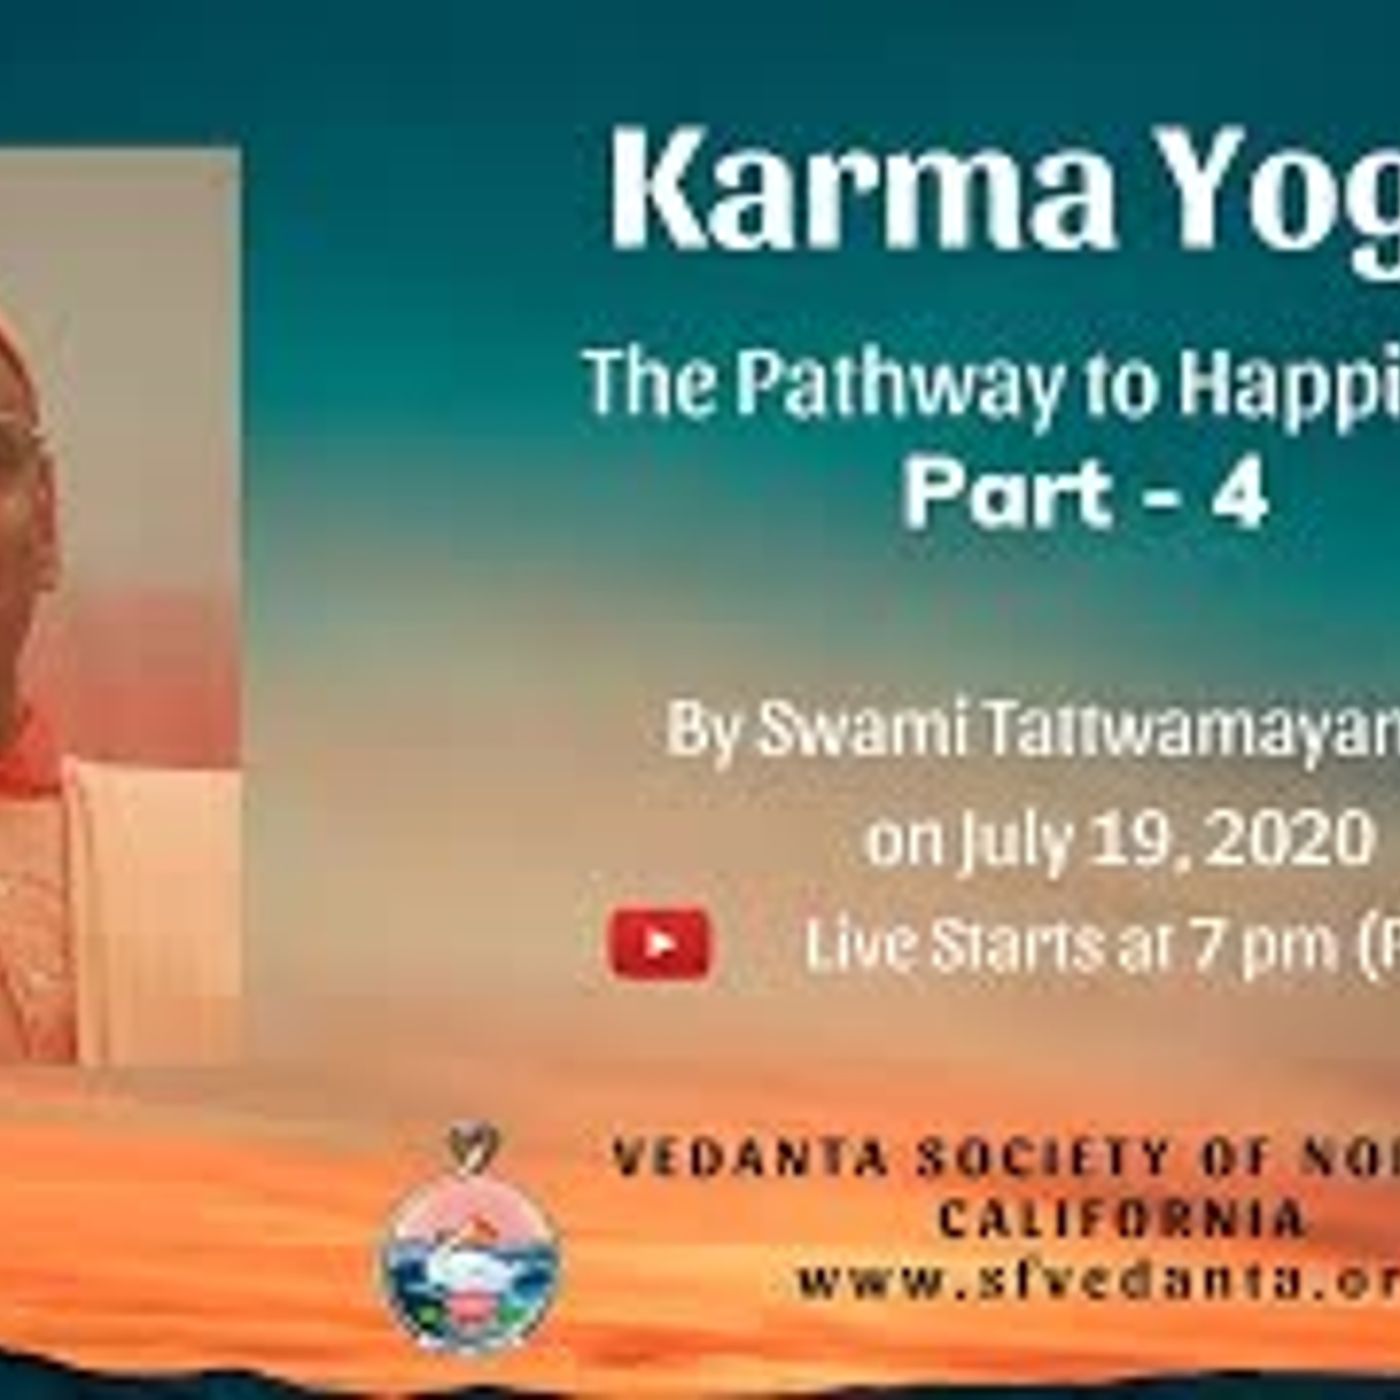 Karma Yoga The Pathway to Happiness - Online Retreat - Part 4